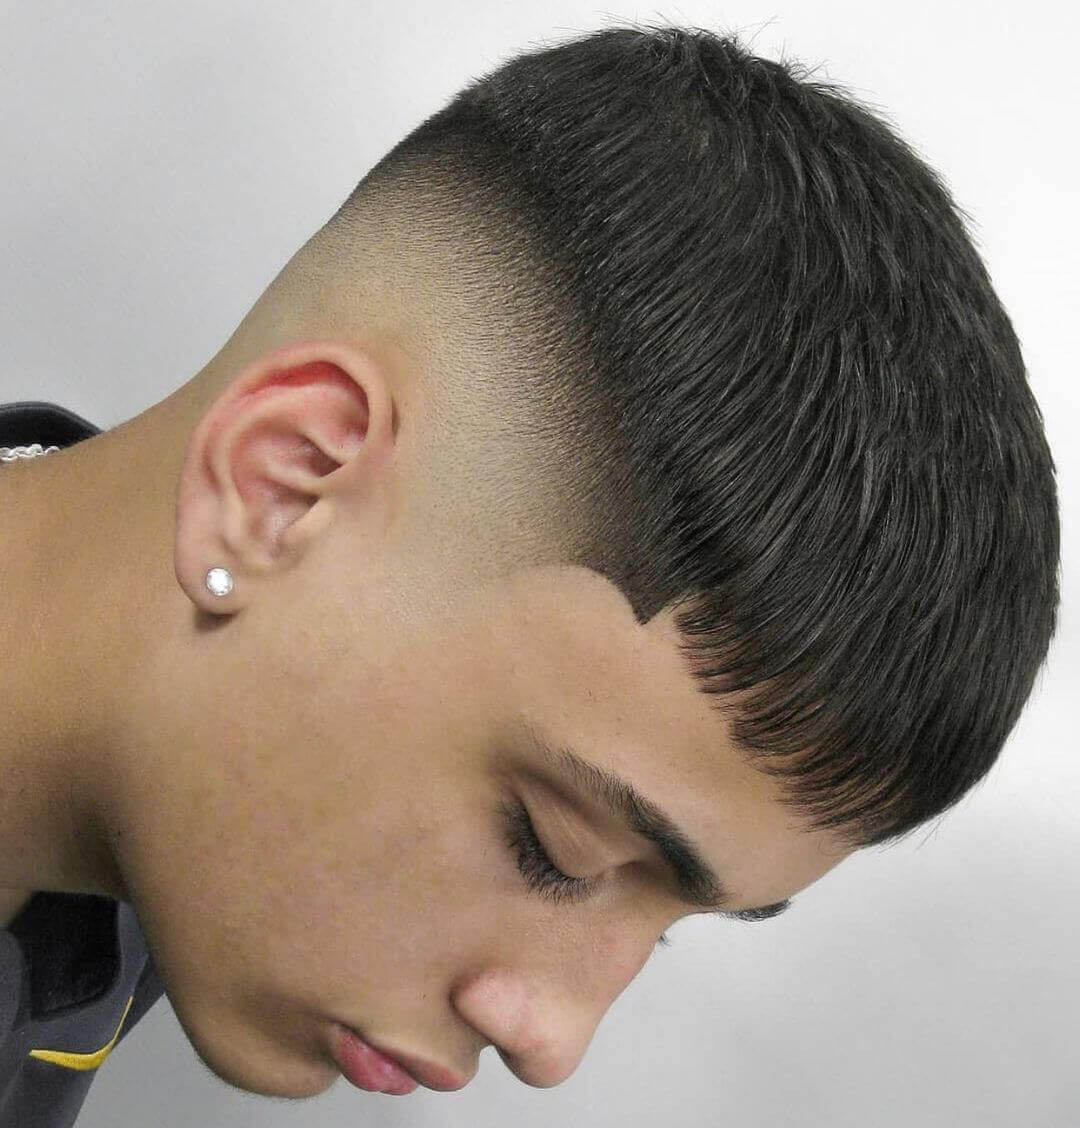 Bald Fade Haircut Variations To Try This Year For A Cool, Clean Look